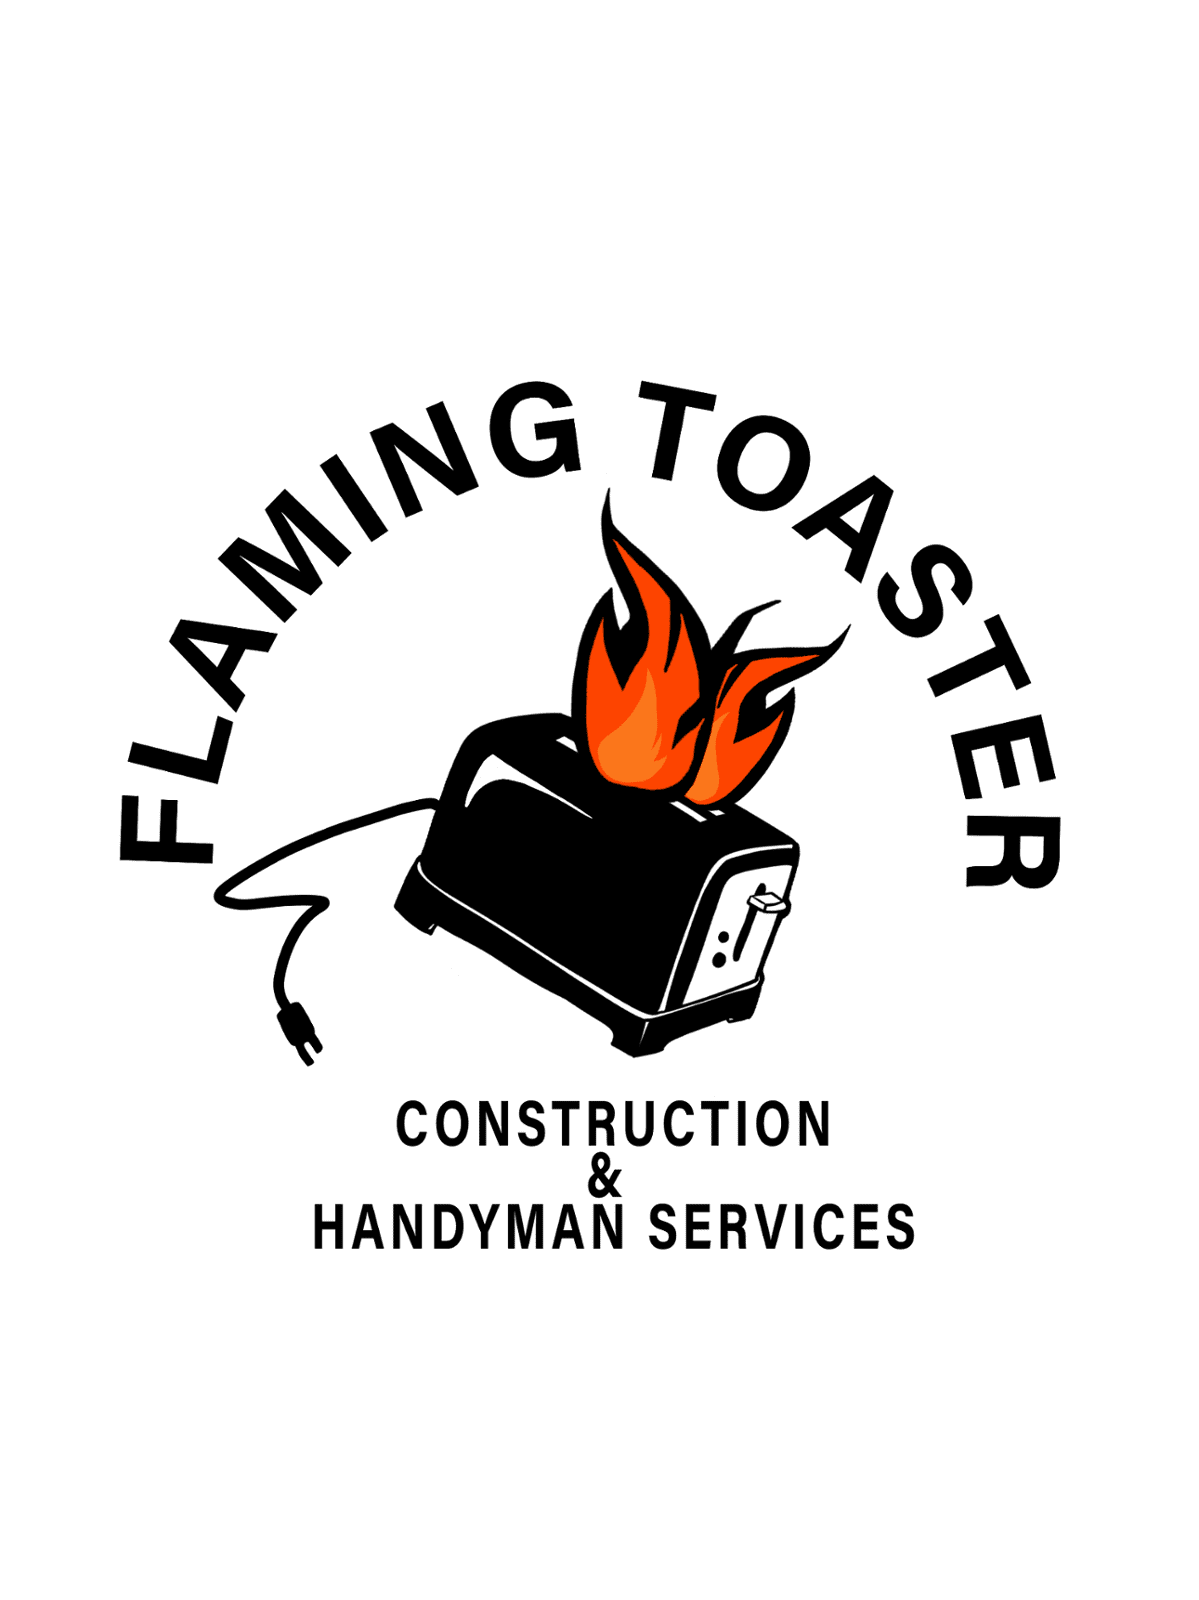 Flaming Toaster Construction & Handyman Services